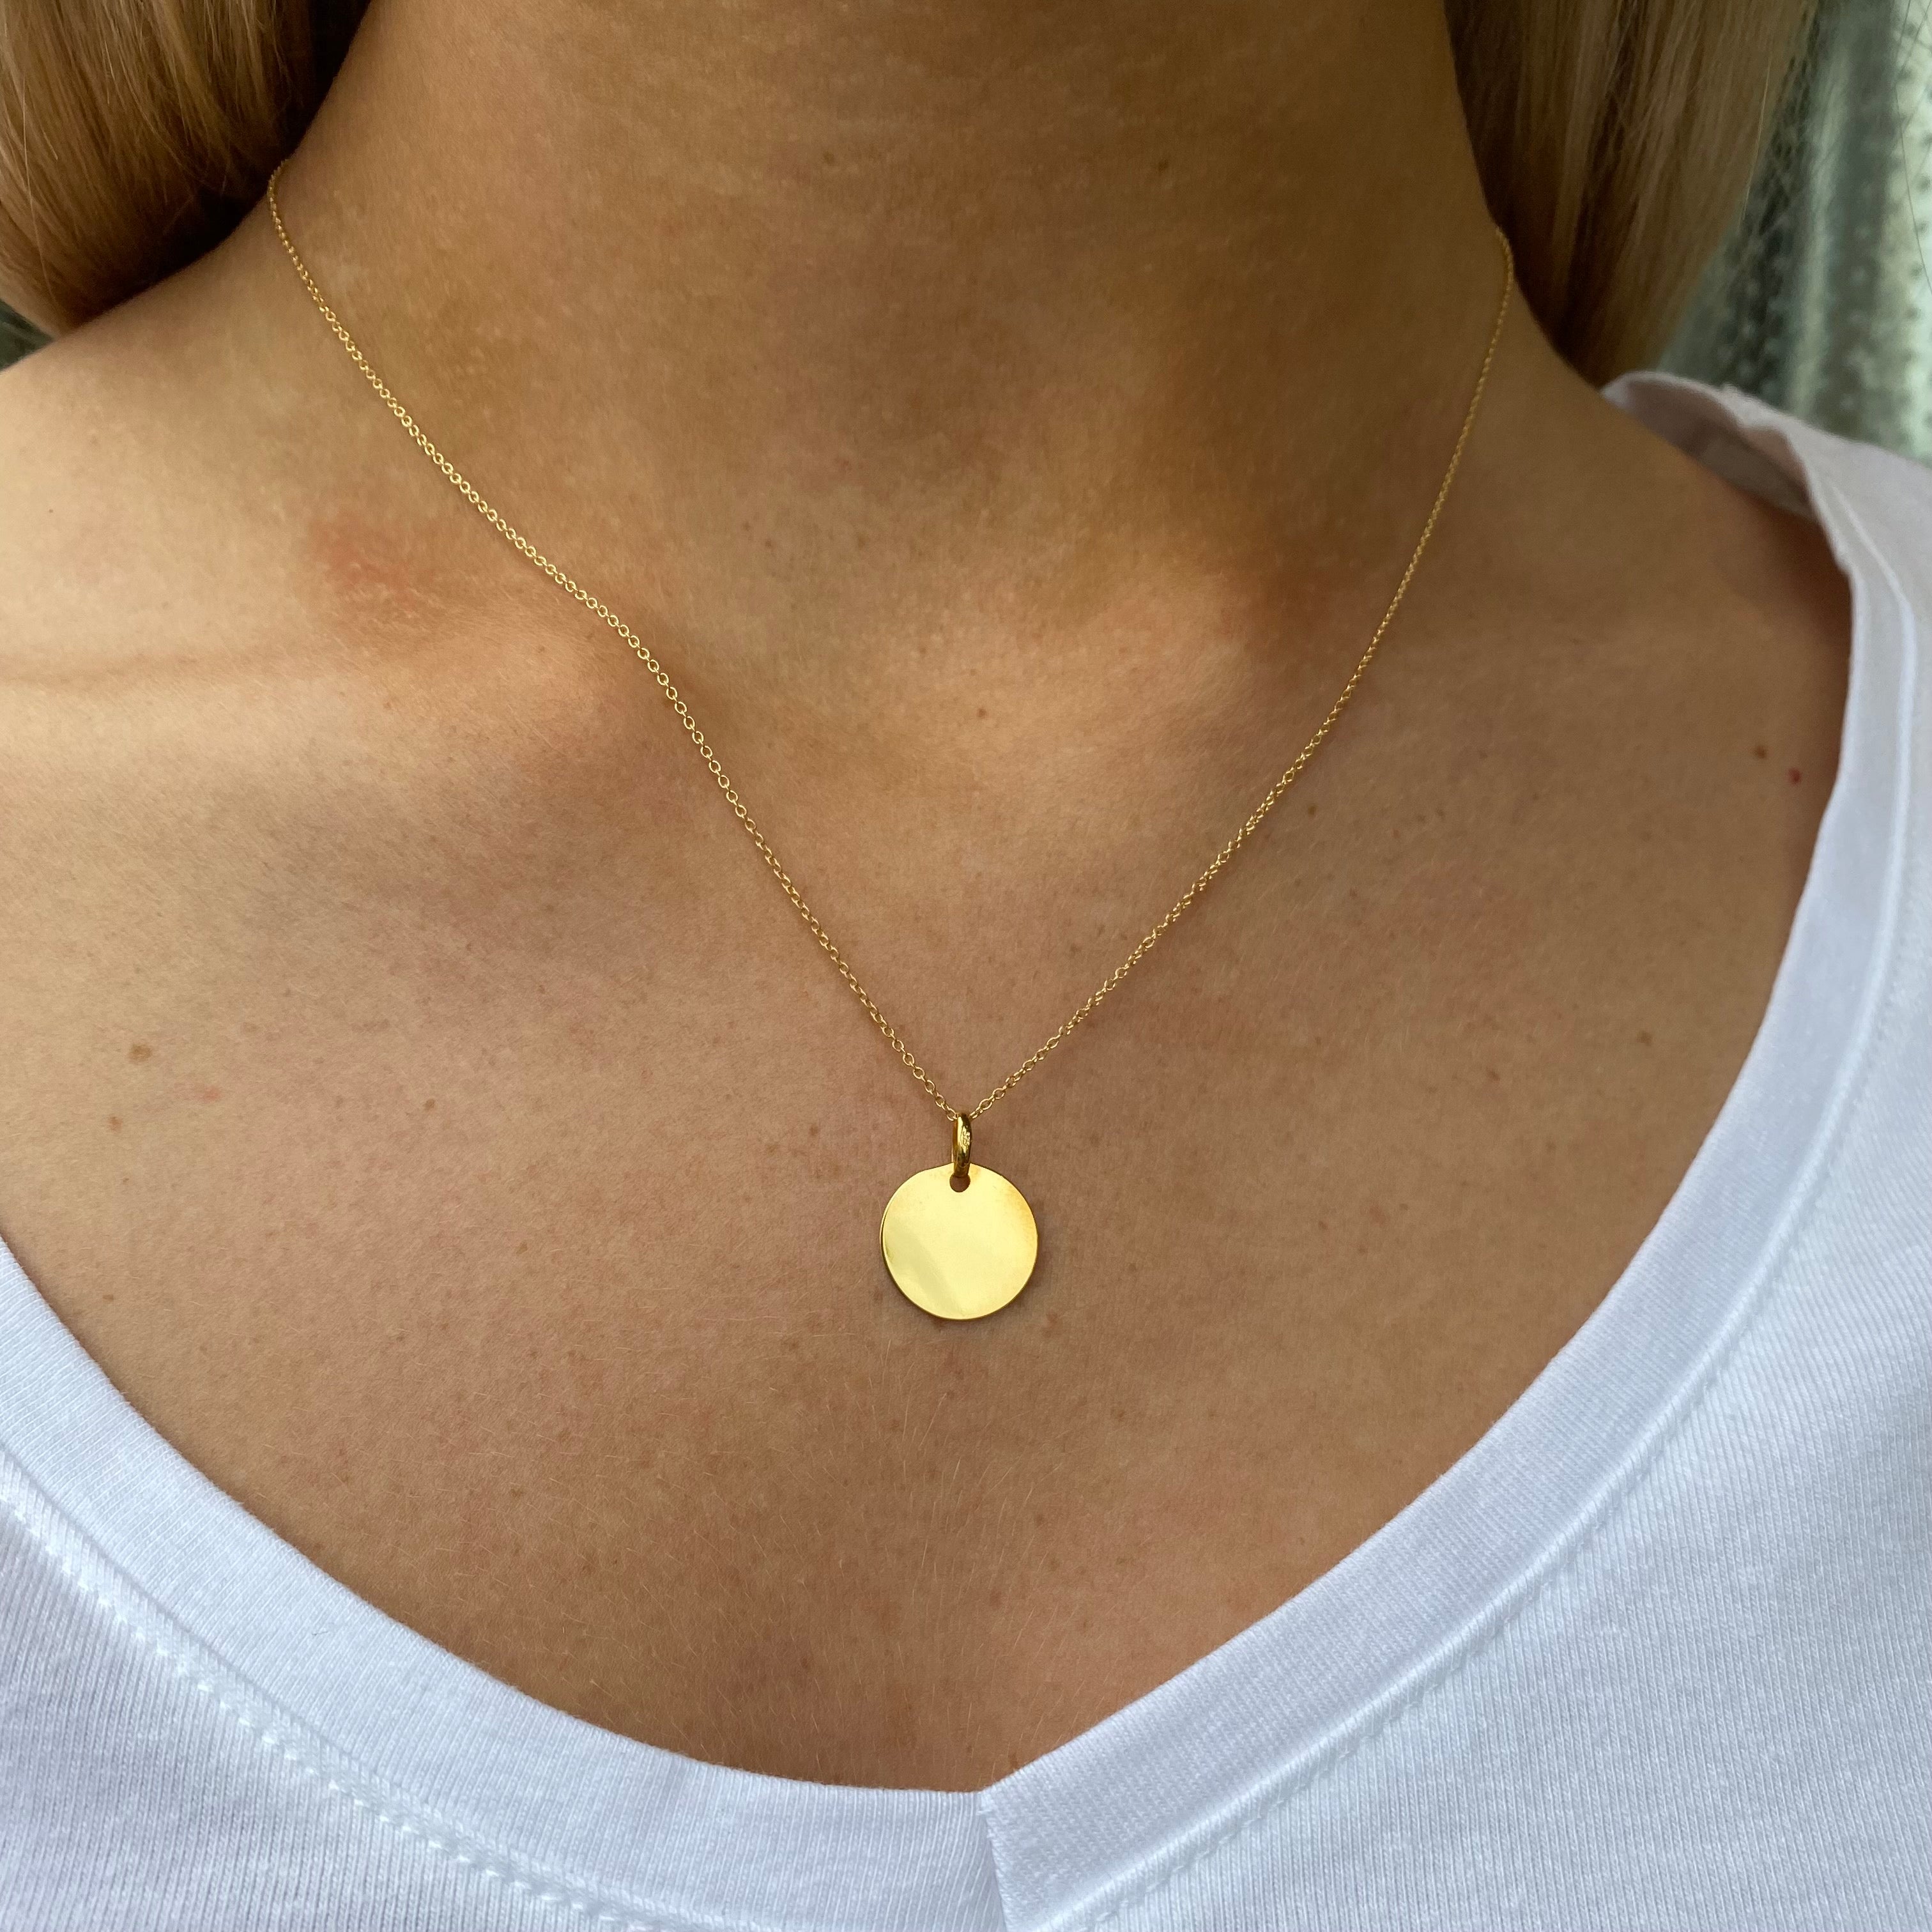 Buy Two Layered Disc Necklaces, Simple Gold Necklaces, Gold Disc Necklaces,  Hammered Gold Disc Necklace Online in India - Etsy